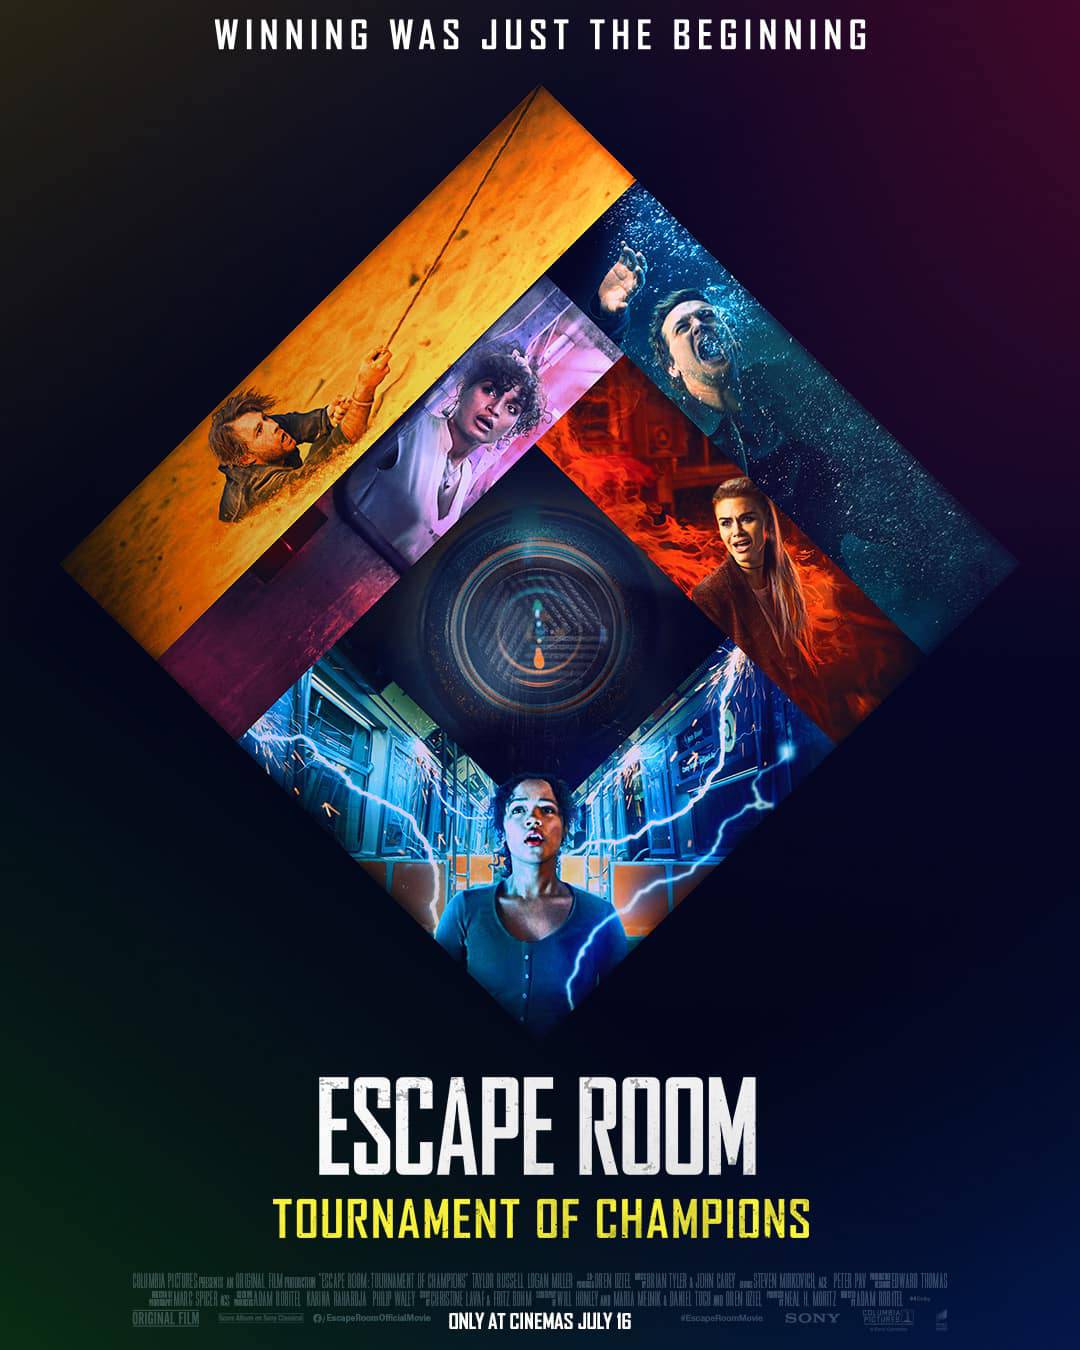 Escape Room Franchise Cast and Character Guide (with Ending Spoilers)